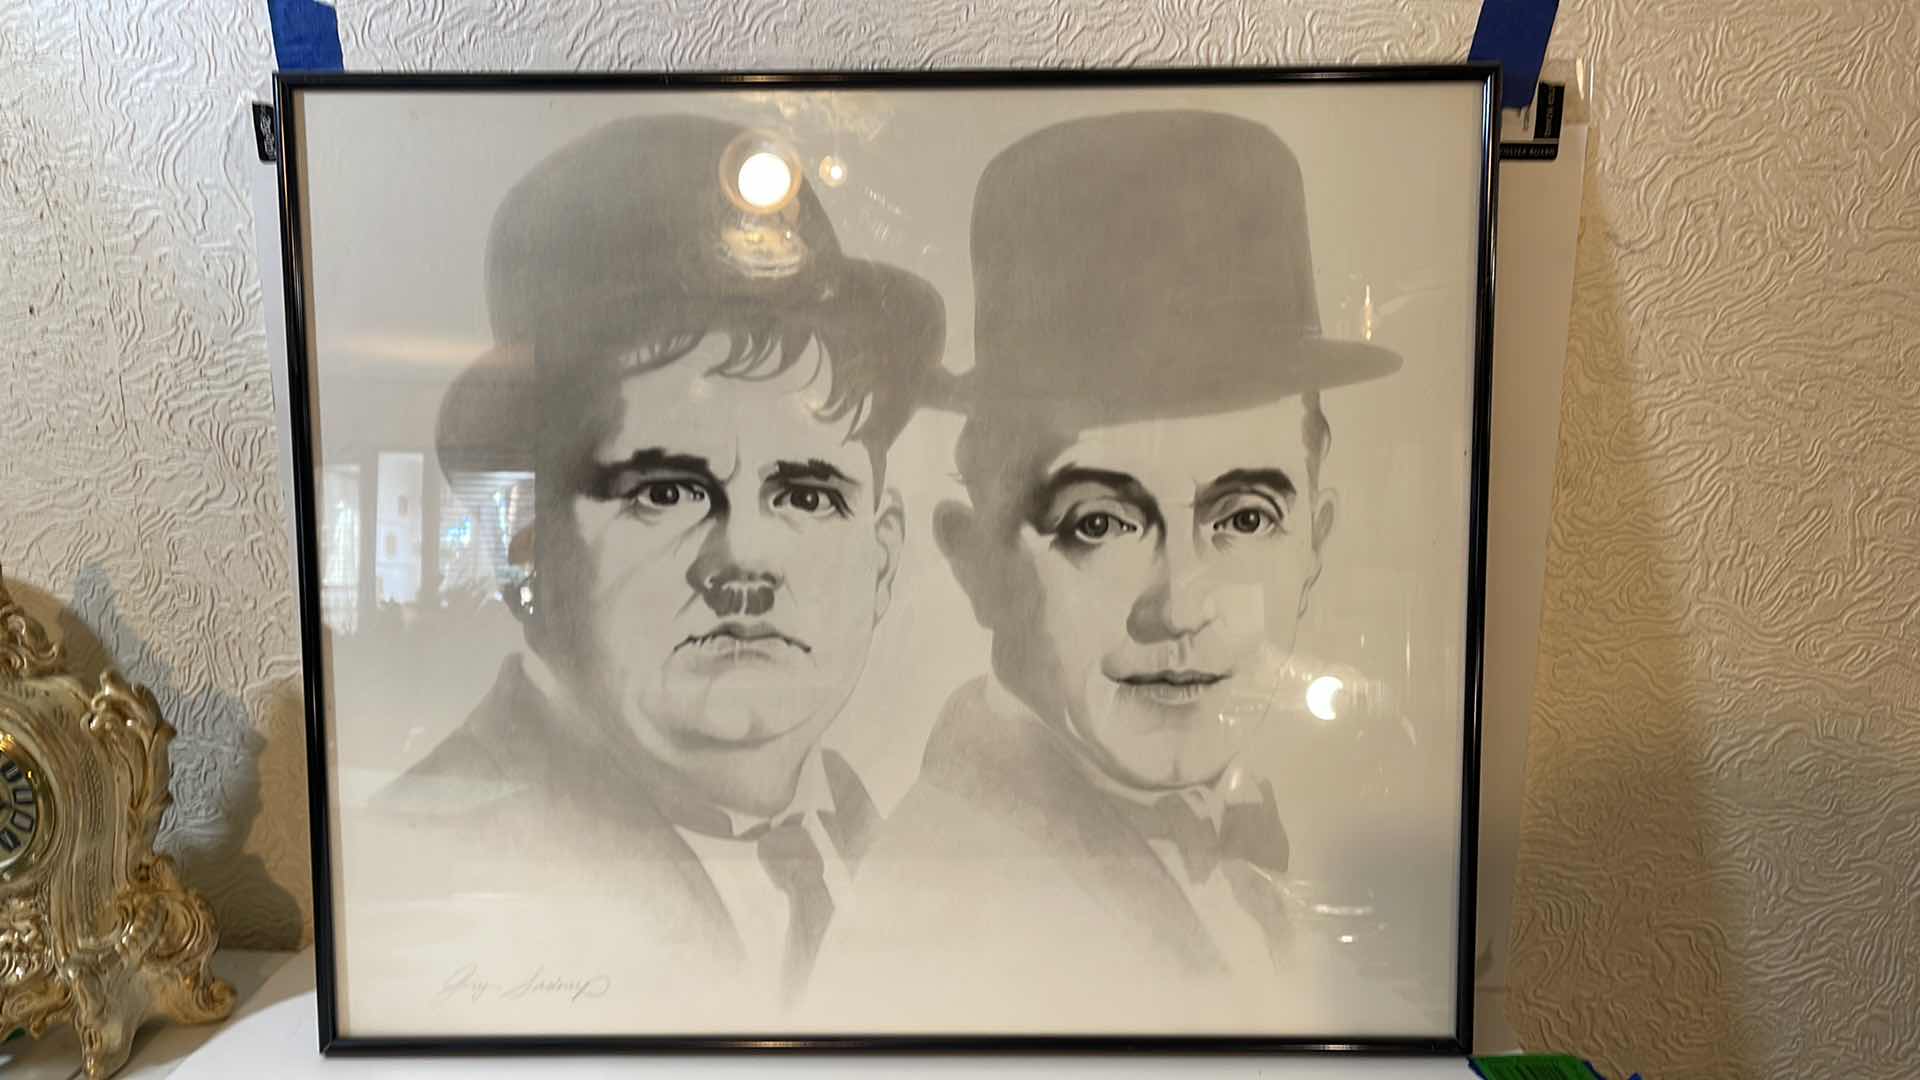 Photo 1 of GARY SADERUP SIGNED PRINT SKETCH OF LAUREL AND HARDY

